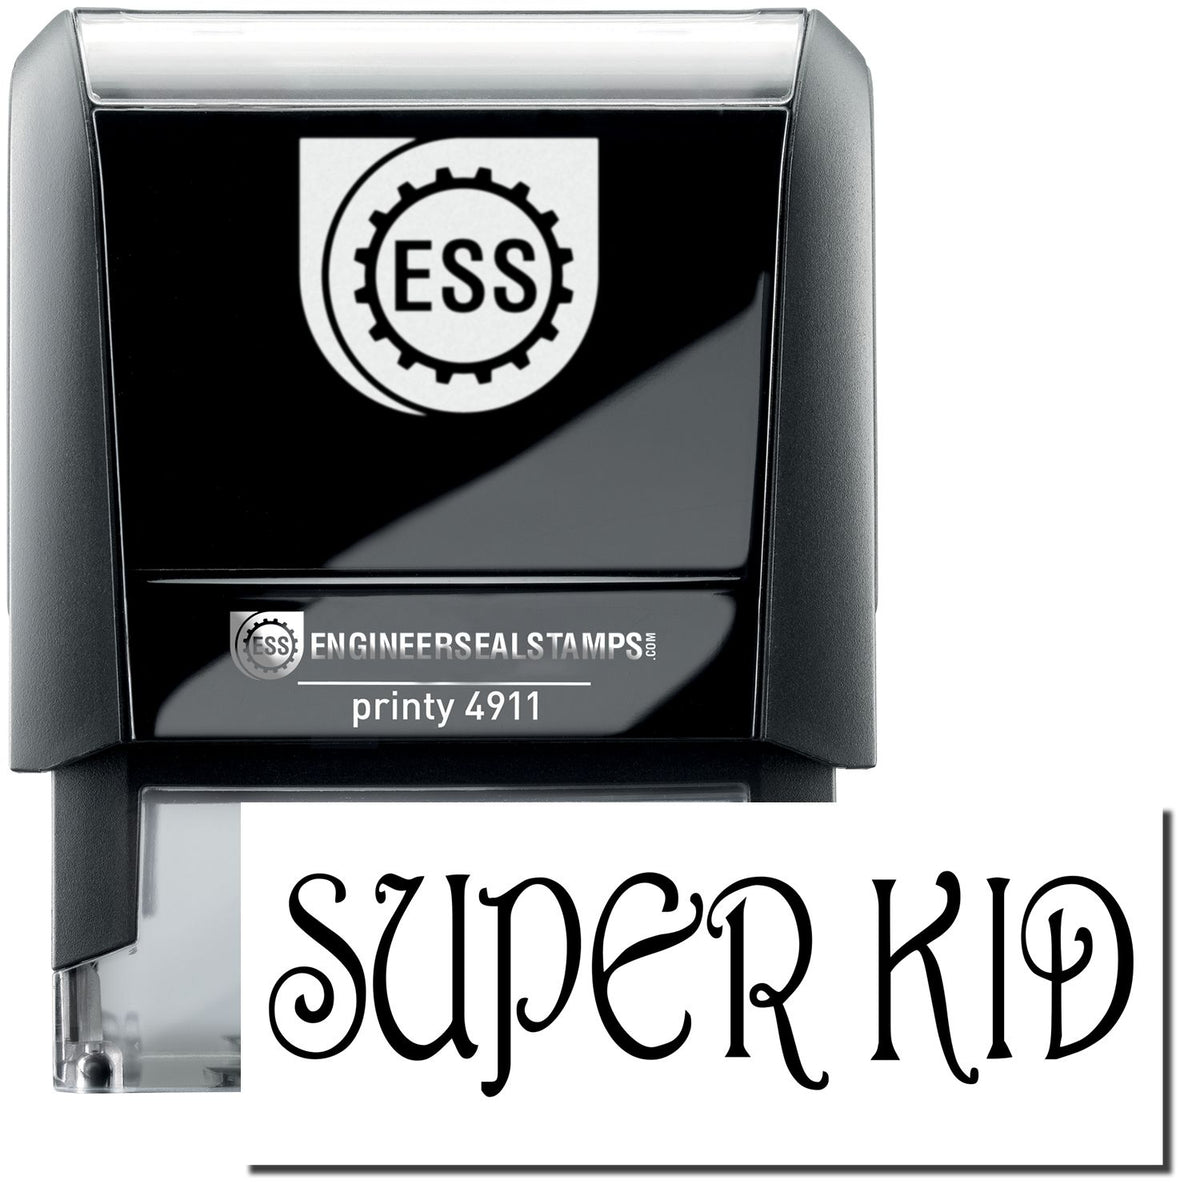 A self-inking stamp with a stamped image showing how the text &quot;SUPER KID&quot; is displayed after stamping.